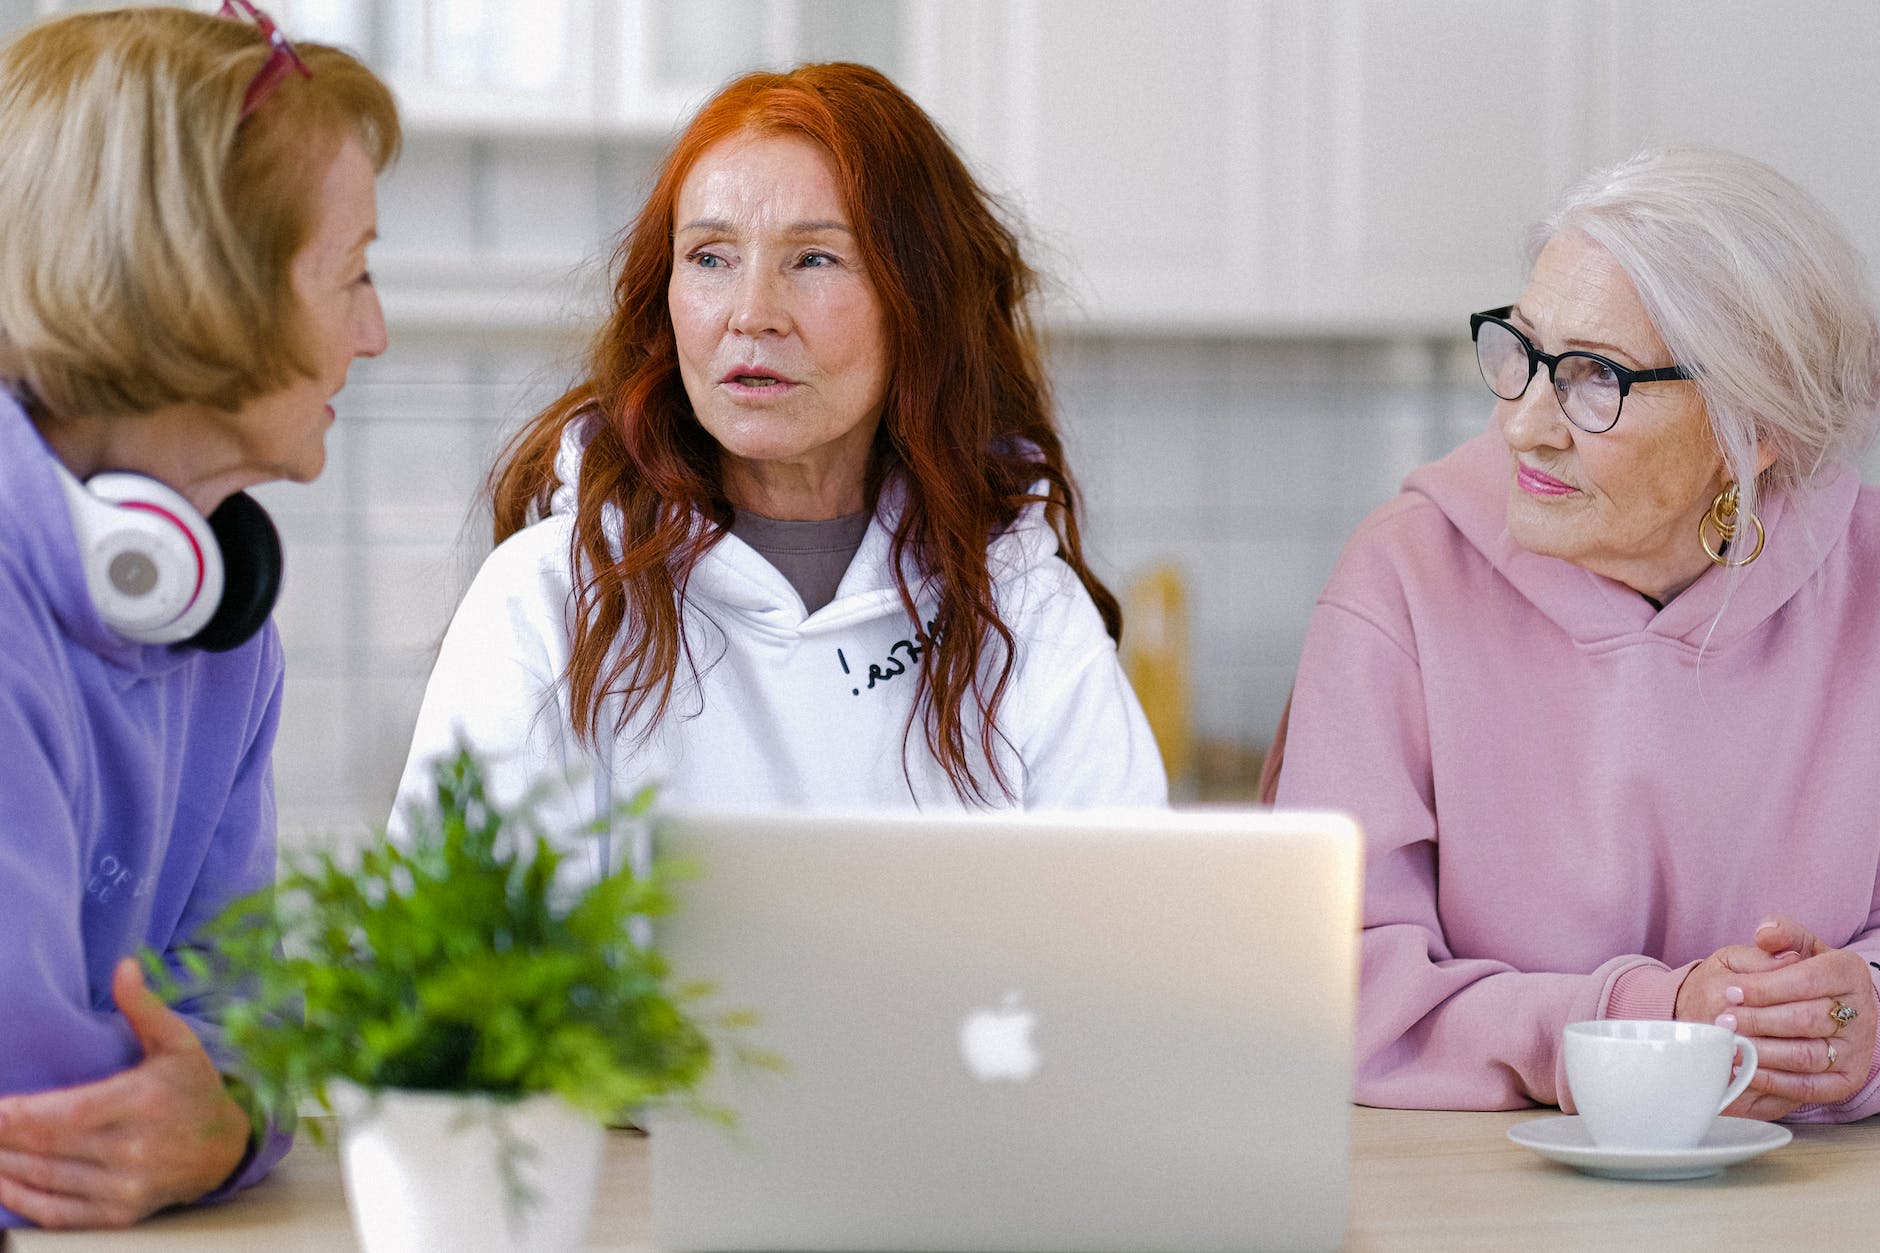 Three older women in casual clothes focused on each other as they have a discussion. A laptop, plant and teacup are on the counter in front of them.